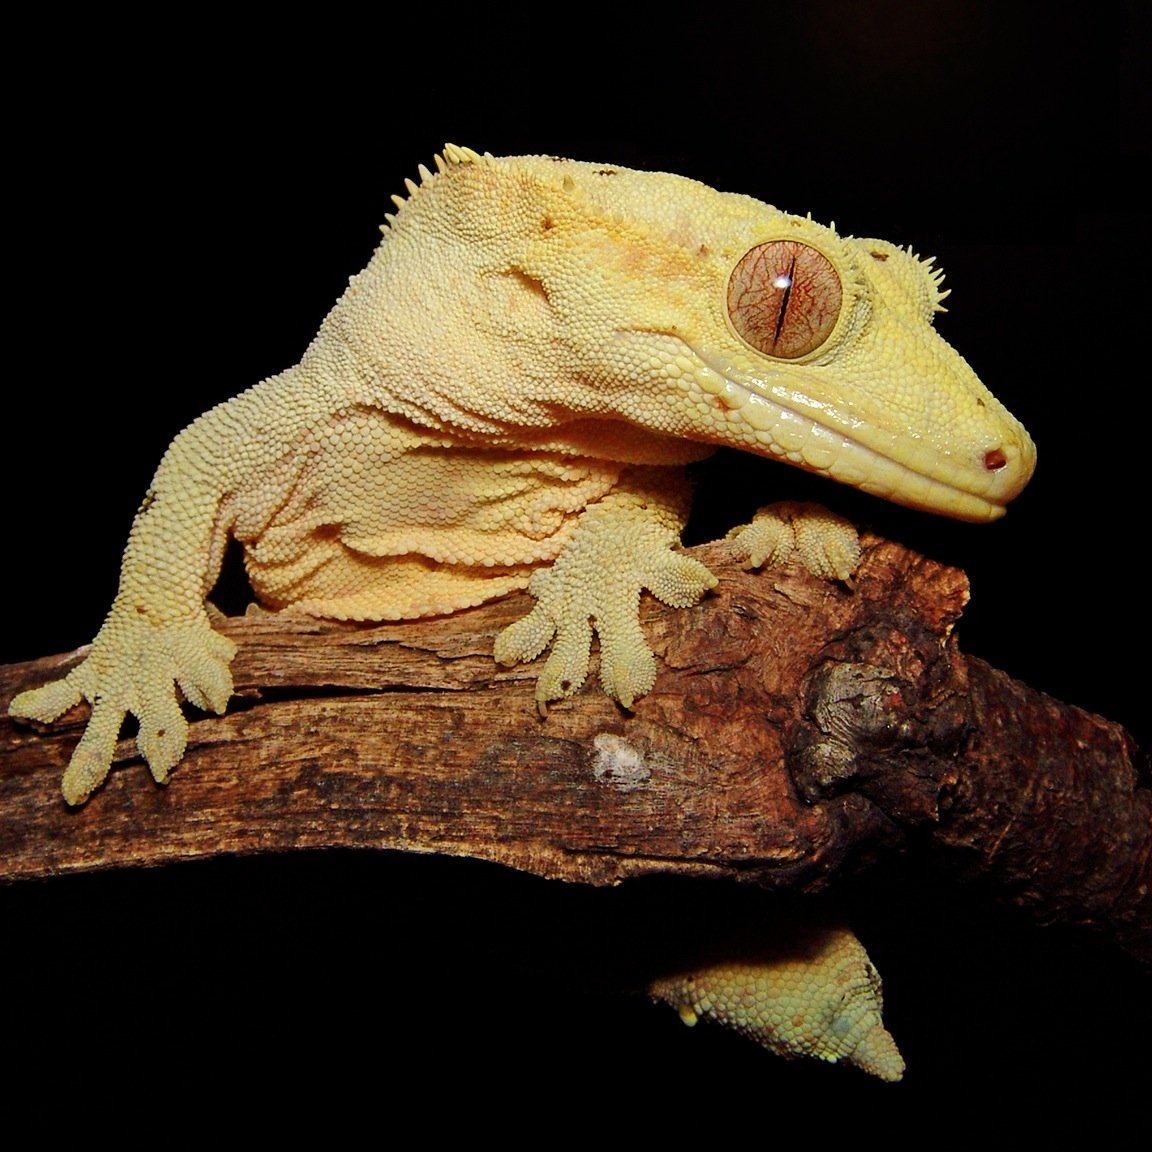 Twitterbot of new #Gecko research papers in #PubMed and #bioRxiv. Curated by @tony_gamble1